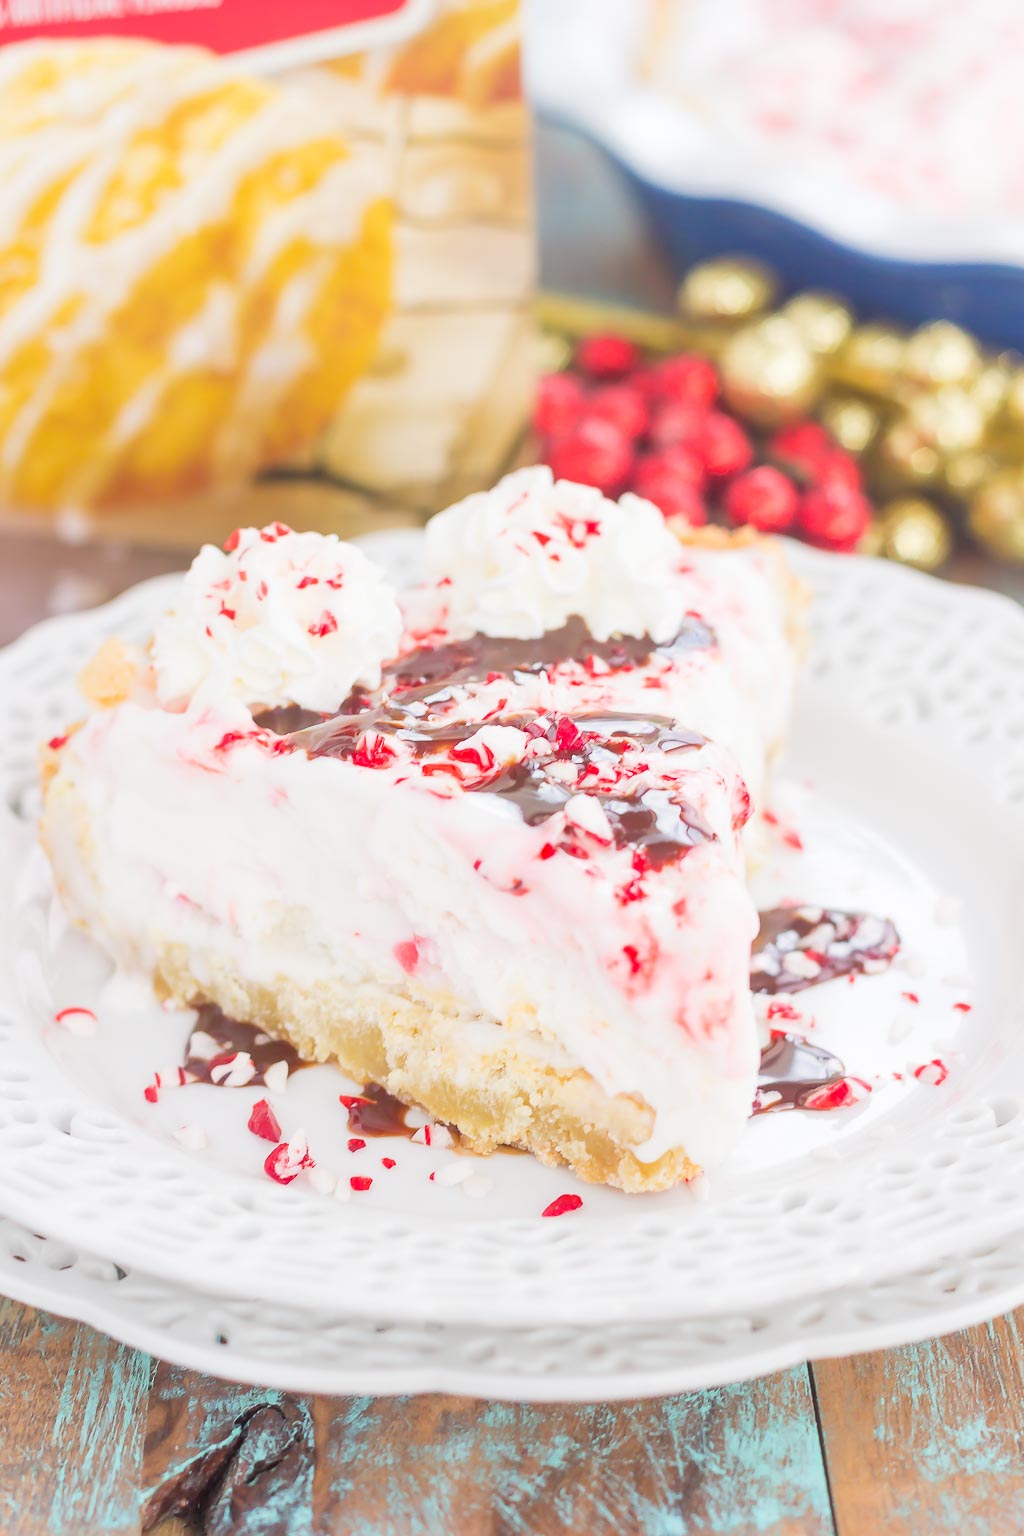 This Peppermint Sugar Cookie Ice Cream Pie is an easy dessert that's full of holiday flavors. A buttery sugar cookie crust envelopes creamy peppermint ice cream and is topped with crushed candy canes. It's a simple dessert that is sure to impress everyone this holiday season! #sugarcookies #sugarcookiepie #sugarcookieicecreampie #icecreampie #cookiepie #pepperminticecreampie #christmasdessert #holidaydessert #dessert